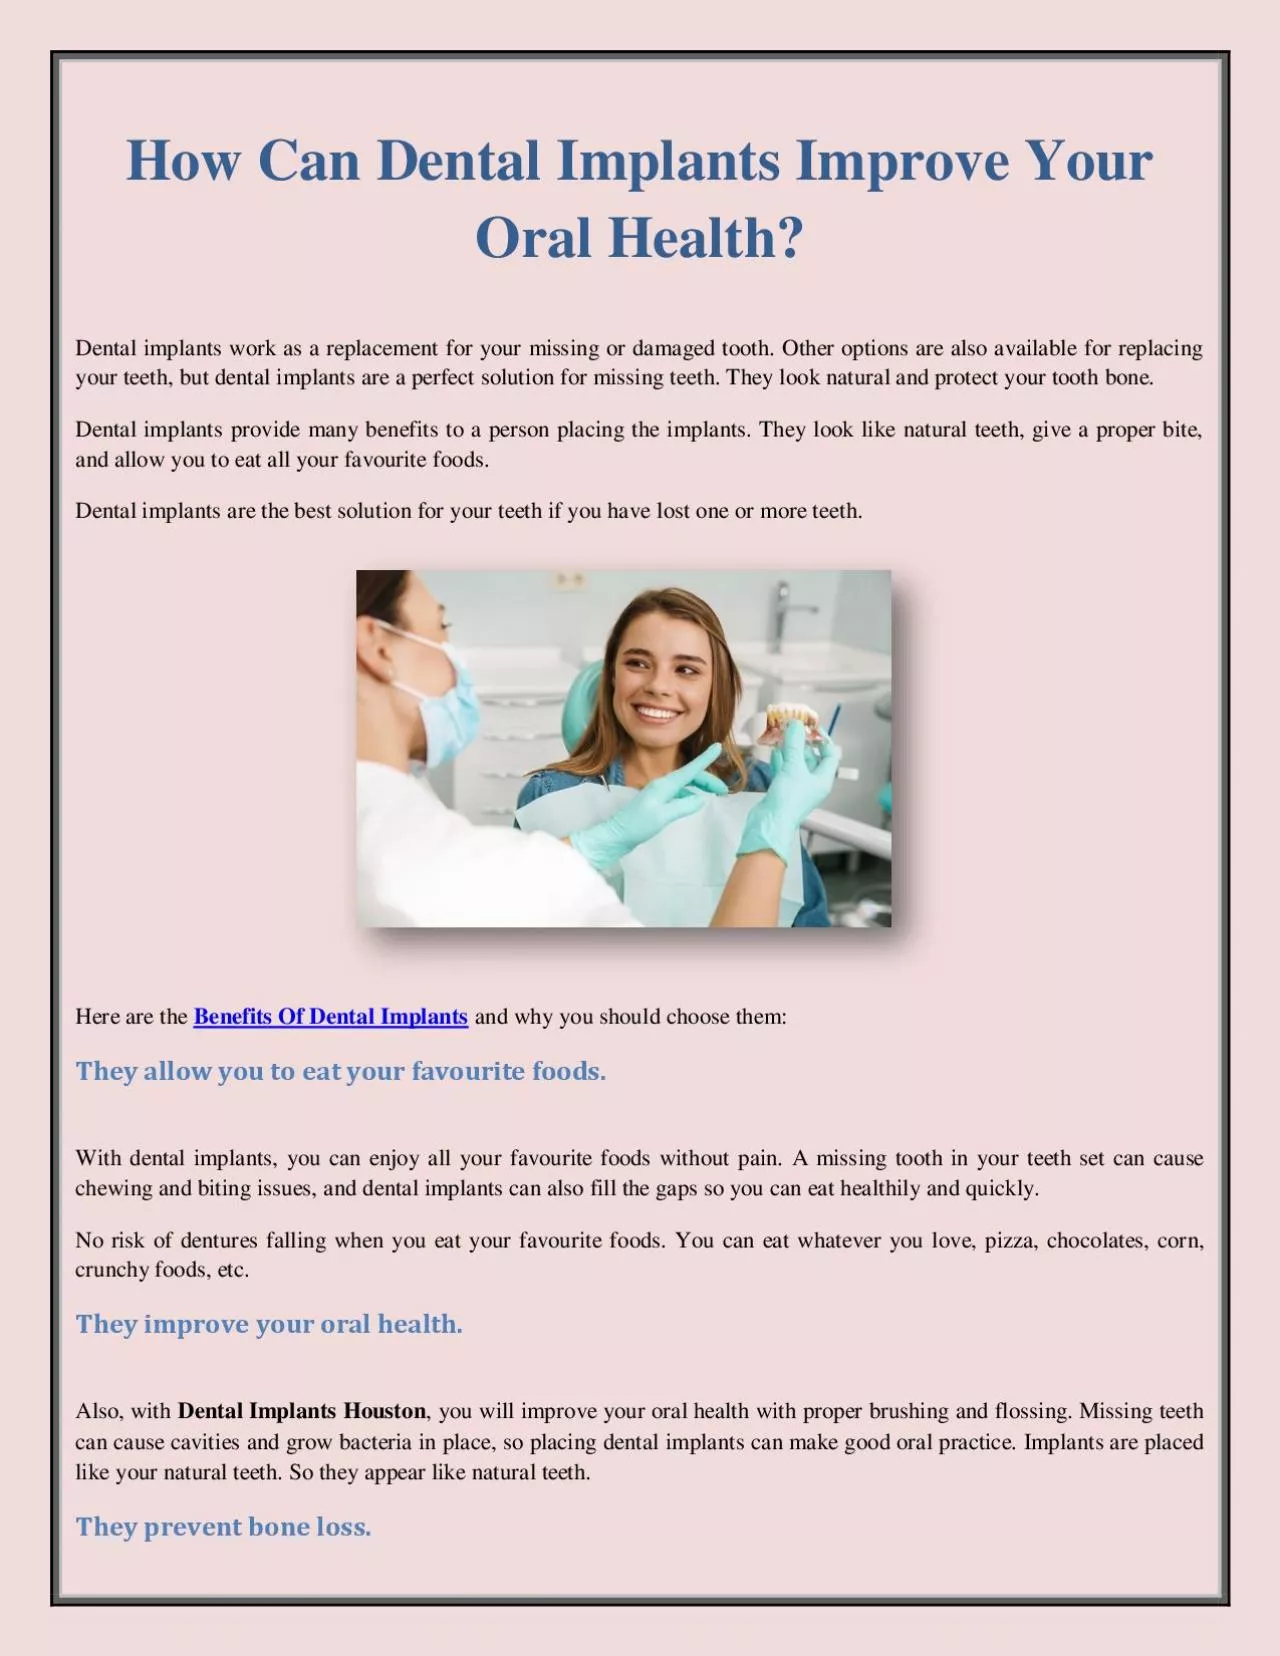 How Can Dental Implants Improve Your Oral Health?